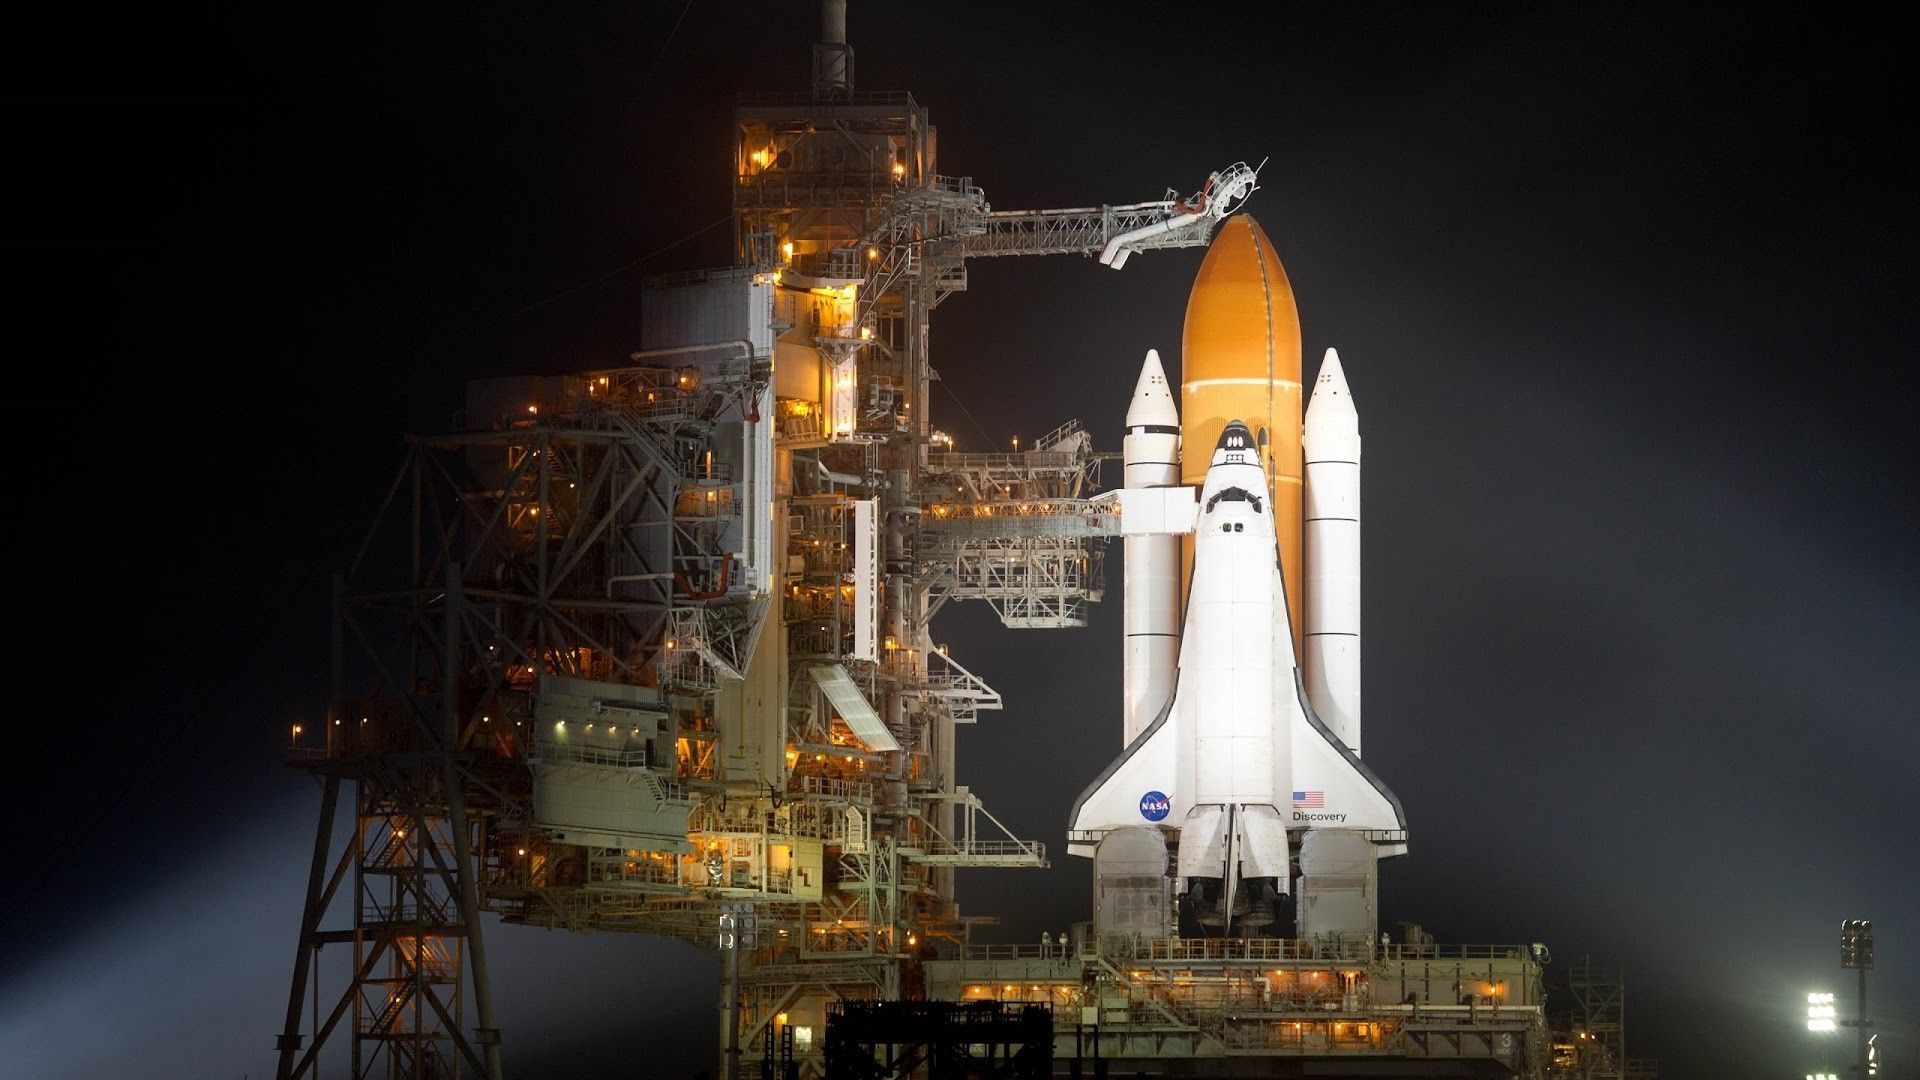 And in the 4th wallpaper is the NASA Discovery Shuttle